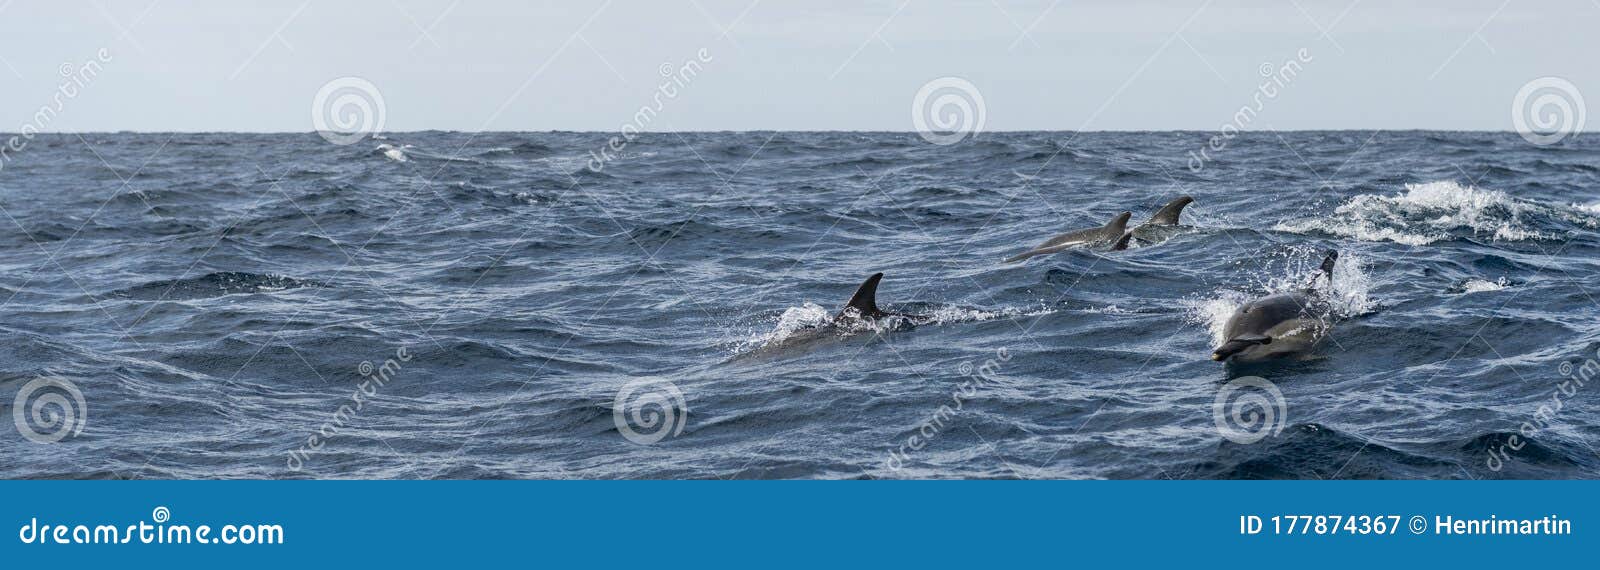 group of common dolphins in the waters of the azores islands near sao miguel island